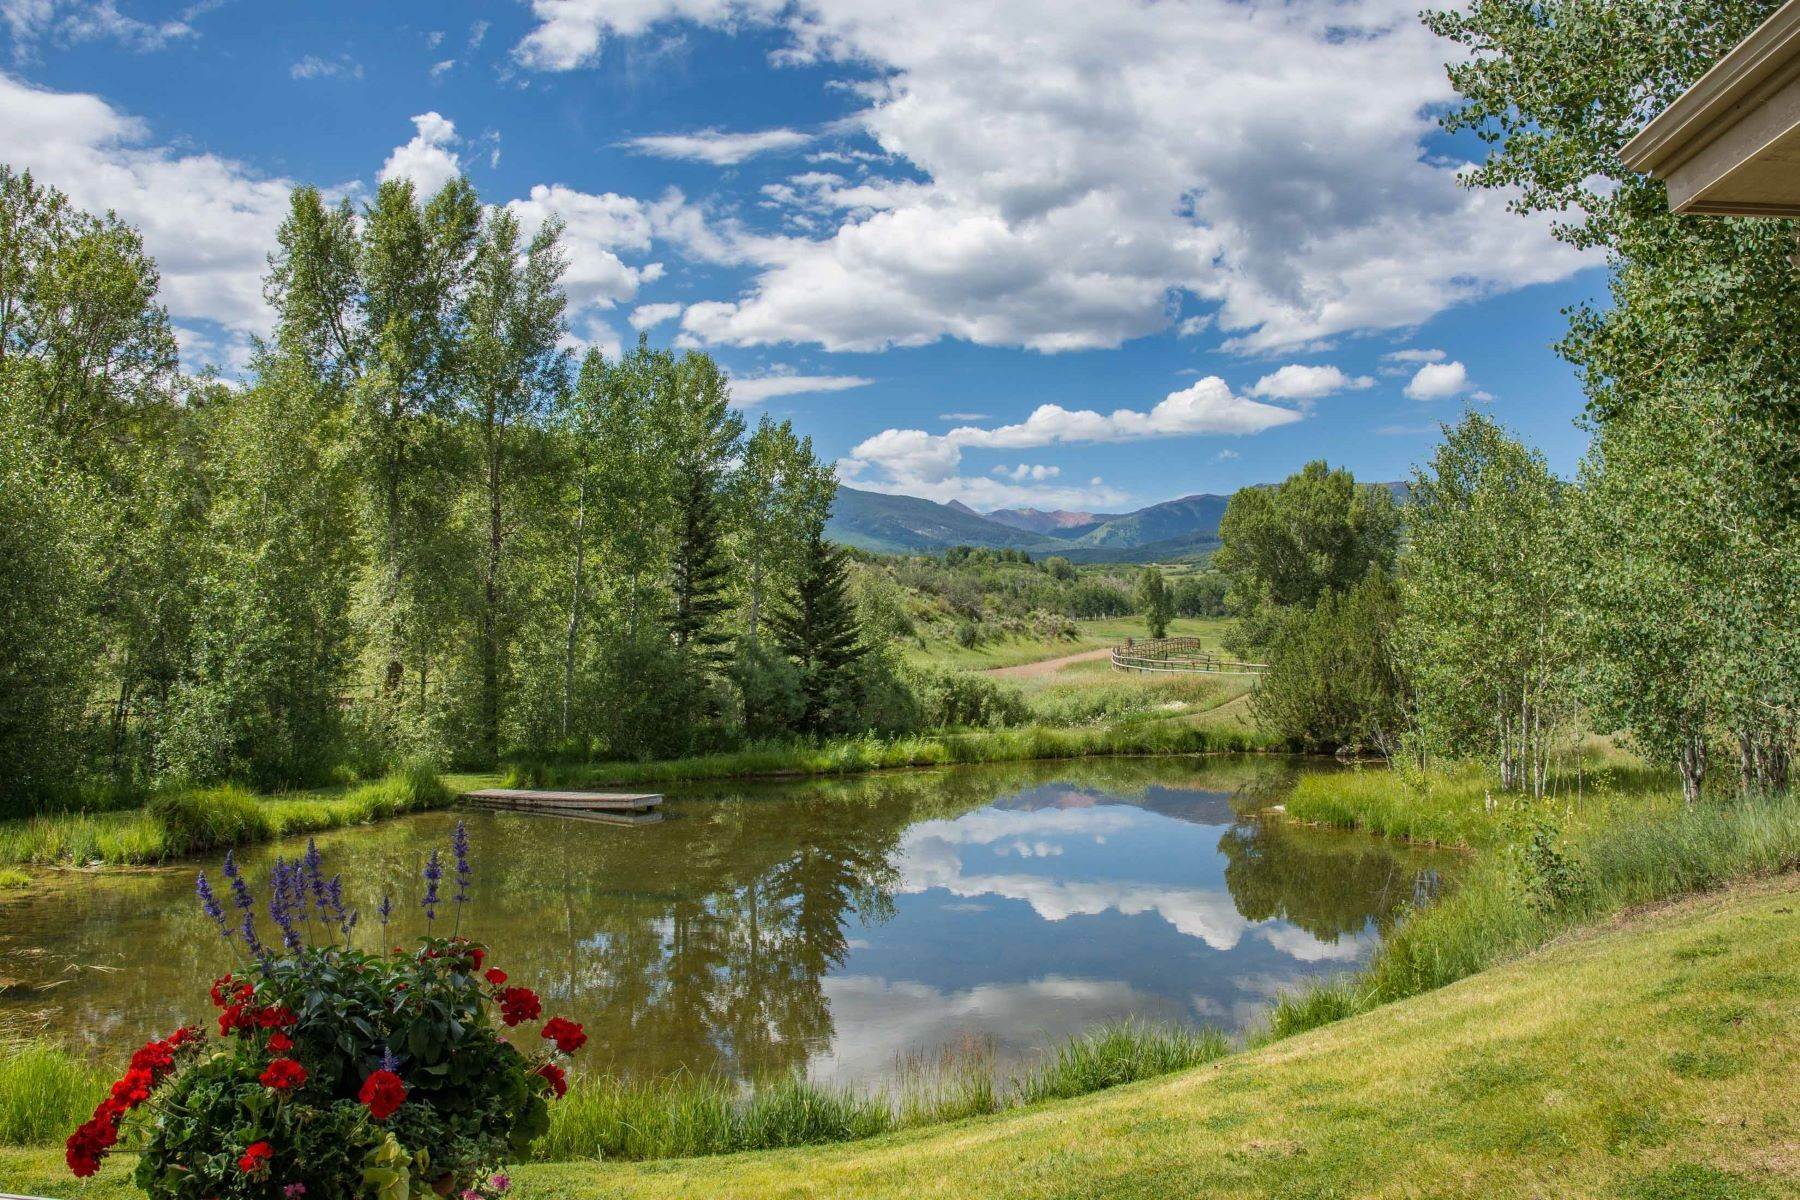 Farm and Ranch Properties 용 매매 에 RARE and UNIQUE opportunity to own the heart of the renowned McCabe Ranch! 1321 Elk Creek & TBD McCabe Ranch, Old Snowmass, 콜로라도 81654 미국